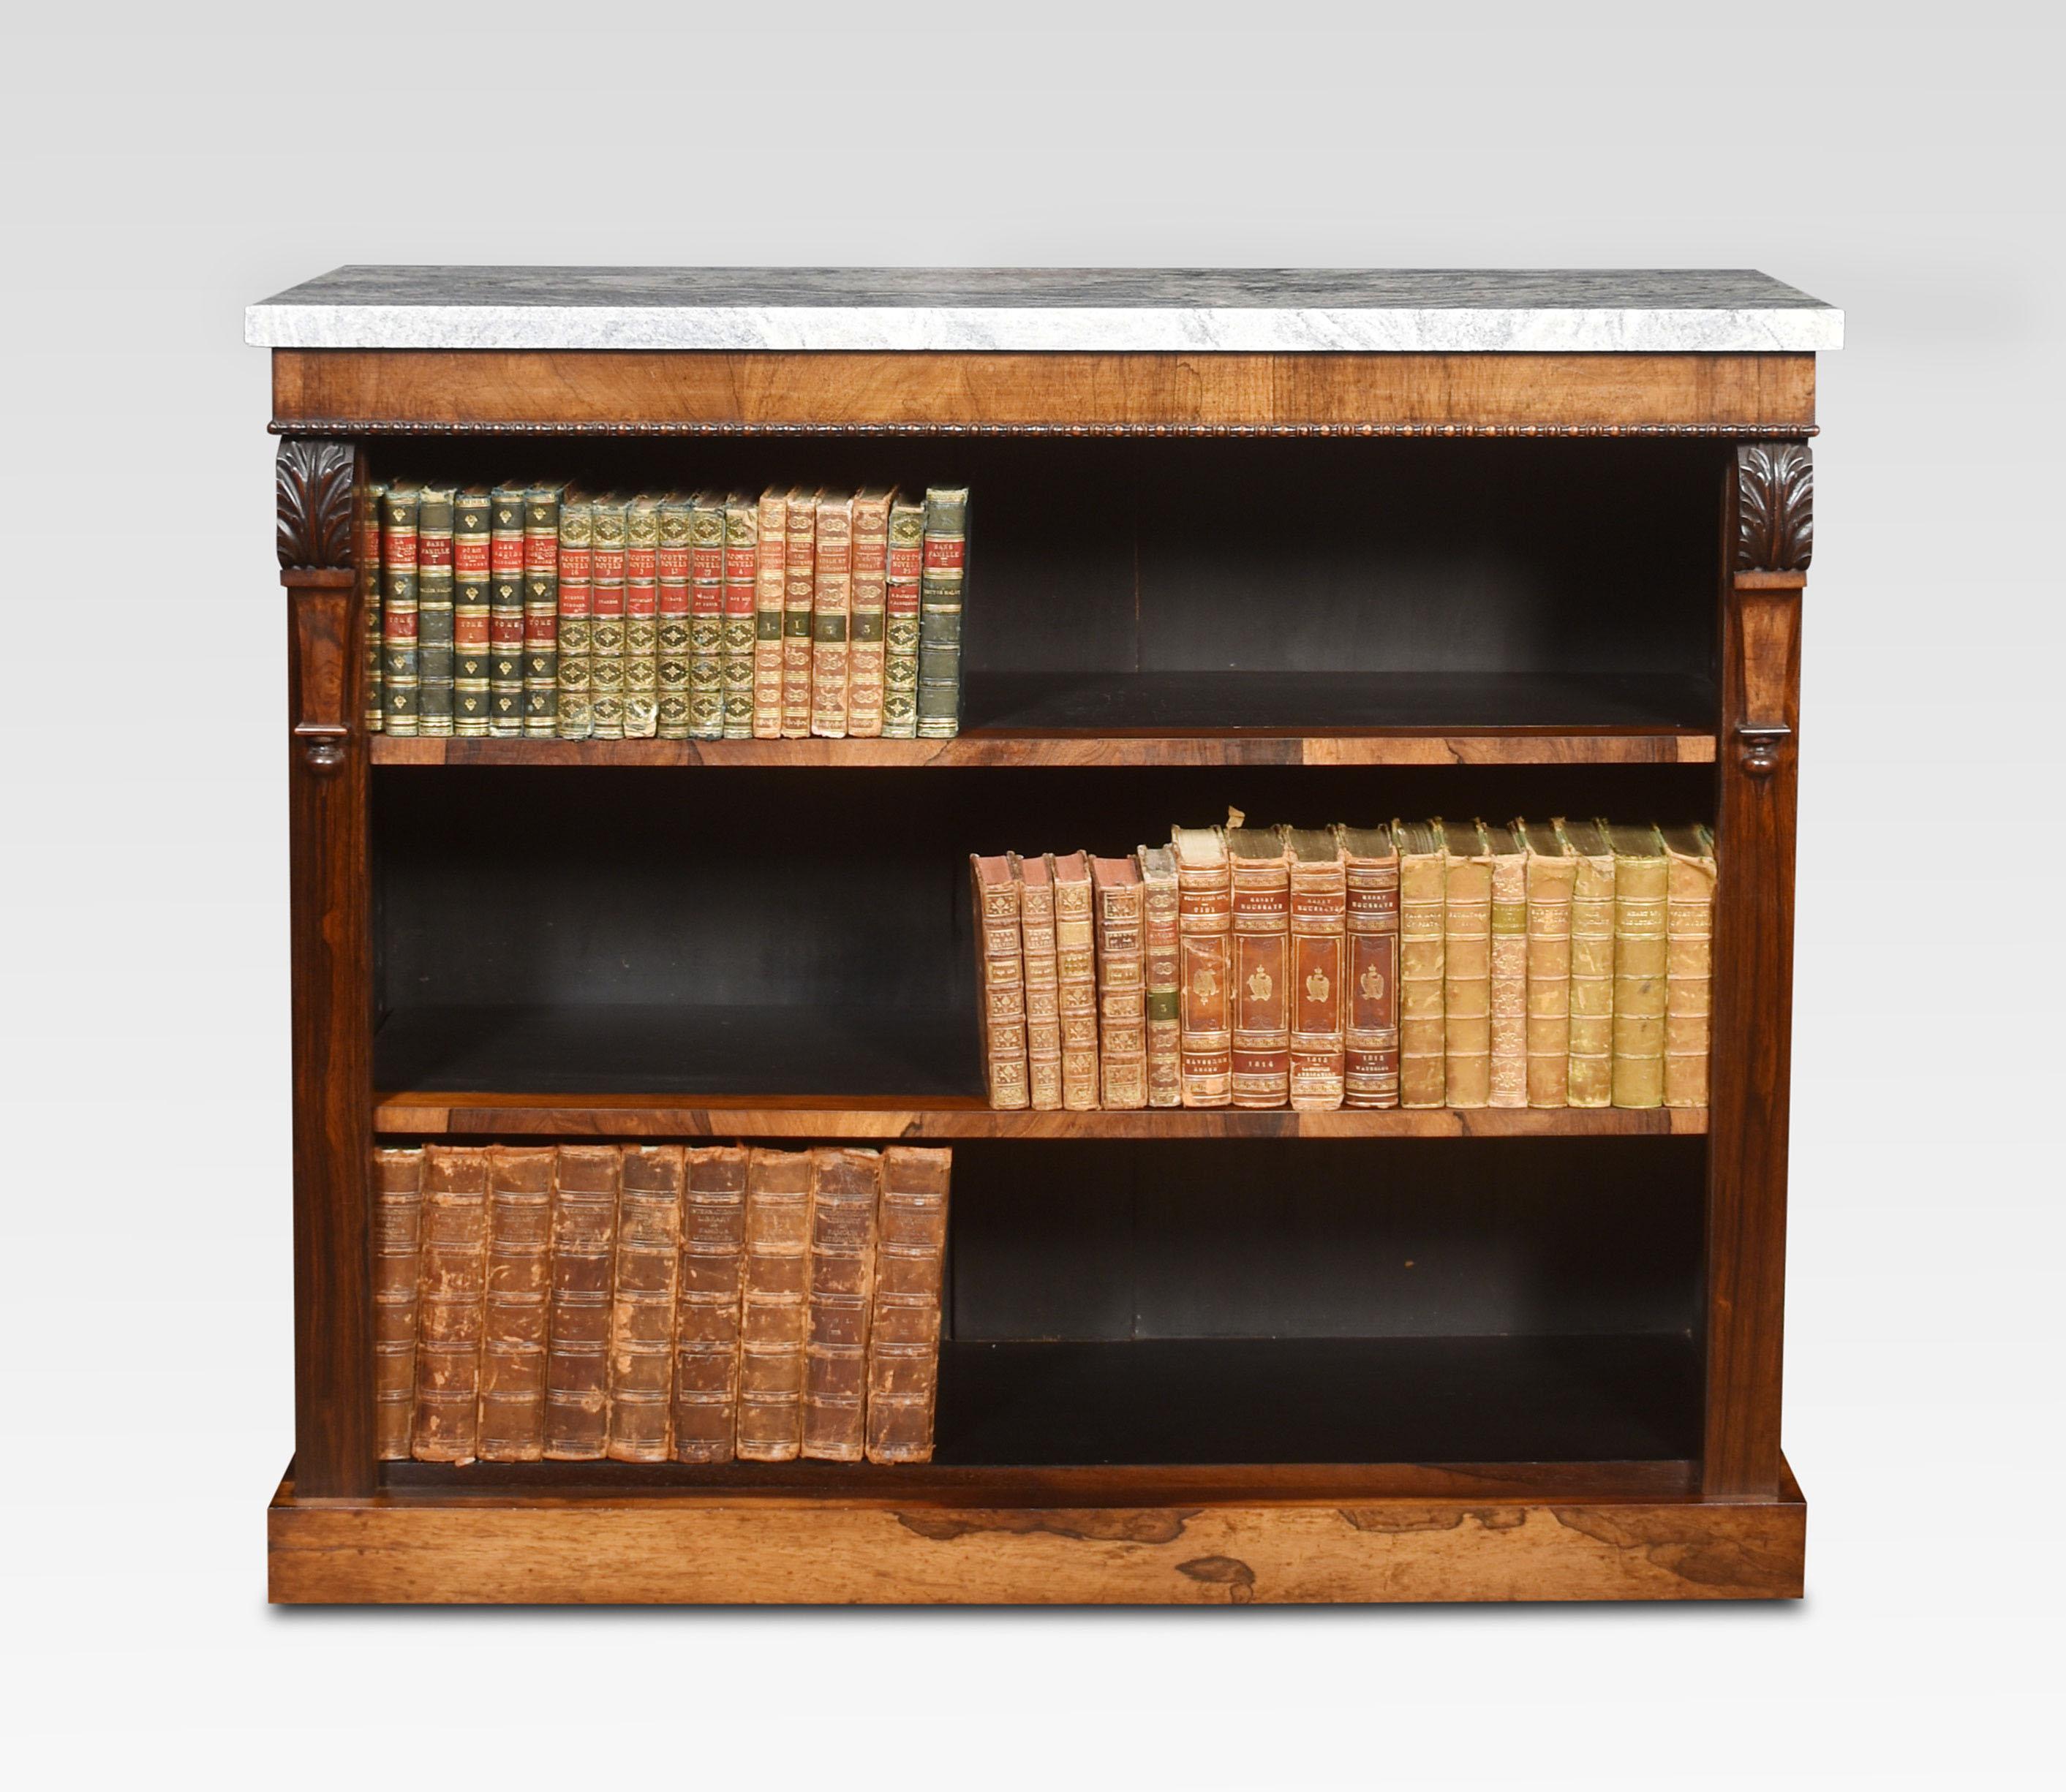 19th-century rosewood open bookcase, the rectangular marble top above carved frieze supported on cared acanthus capped columns. Enclosing two adjustable shelves, all raised up on plinth base.
Dimensions
Height 38.5 inches
Width 45.5 inches
Depth